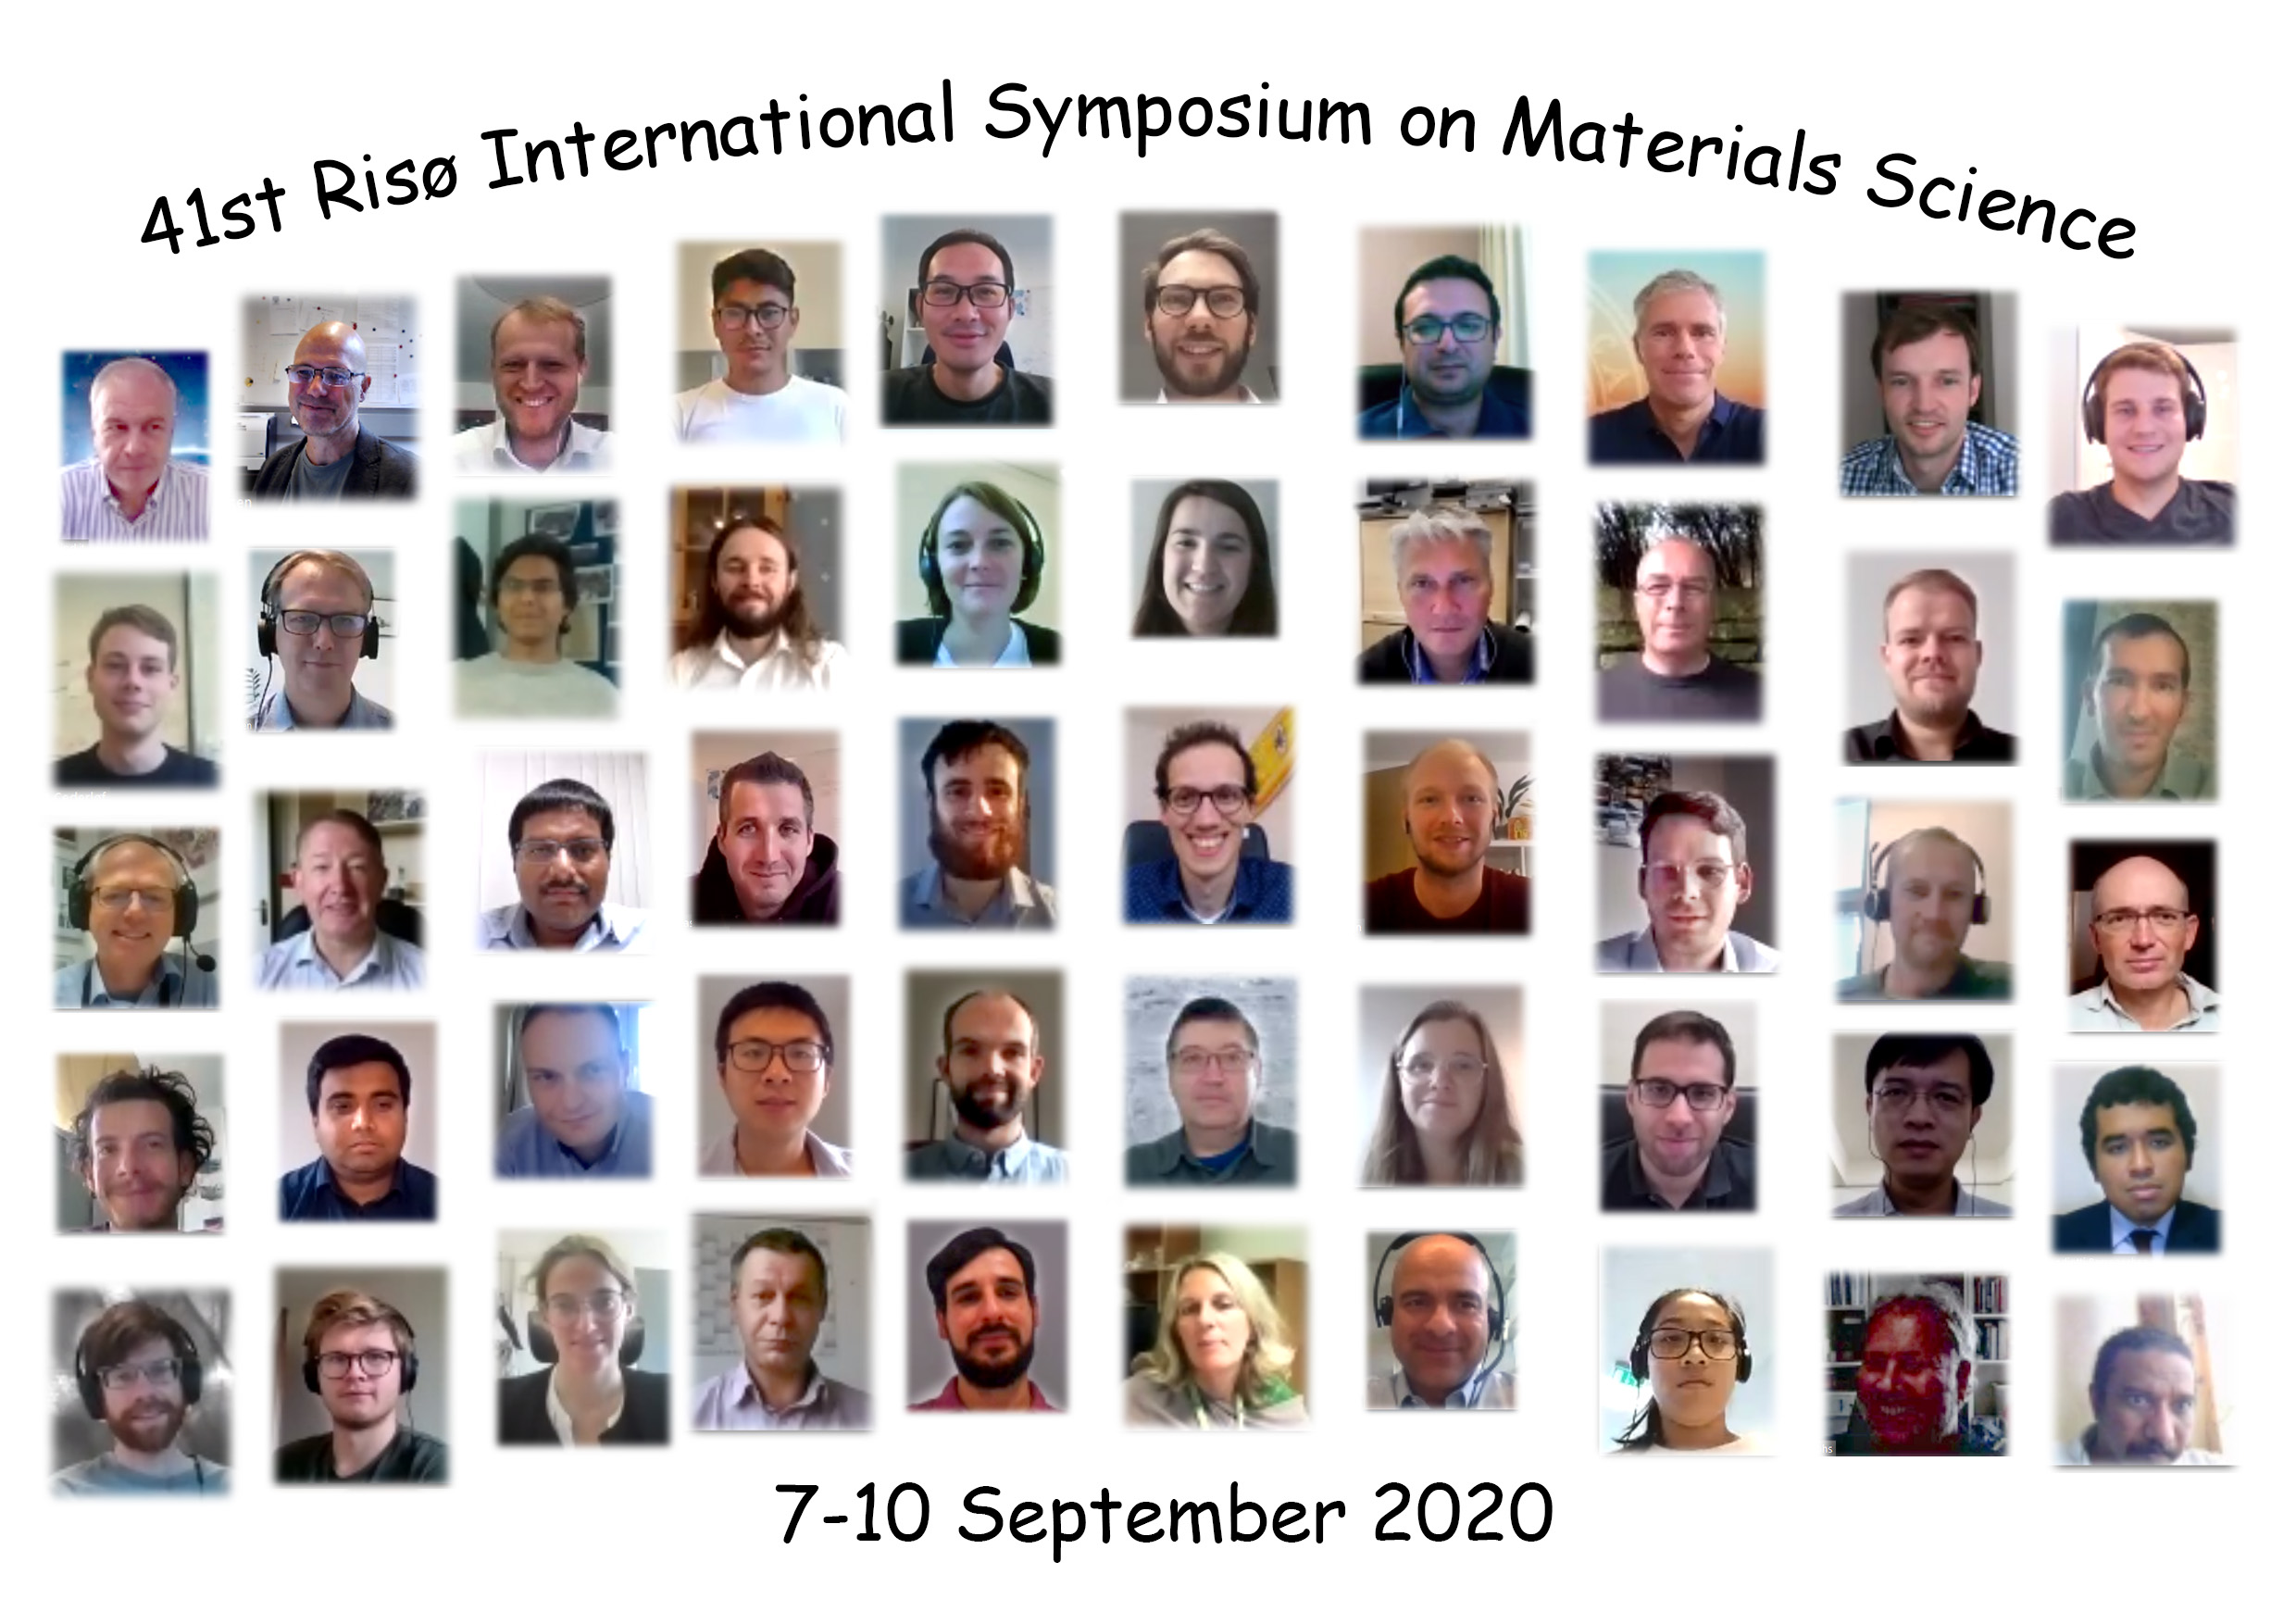 A collage shot of the attendees at the virtual 2020 Riso materials symposium